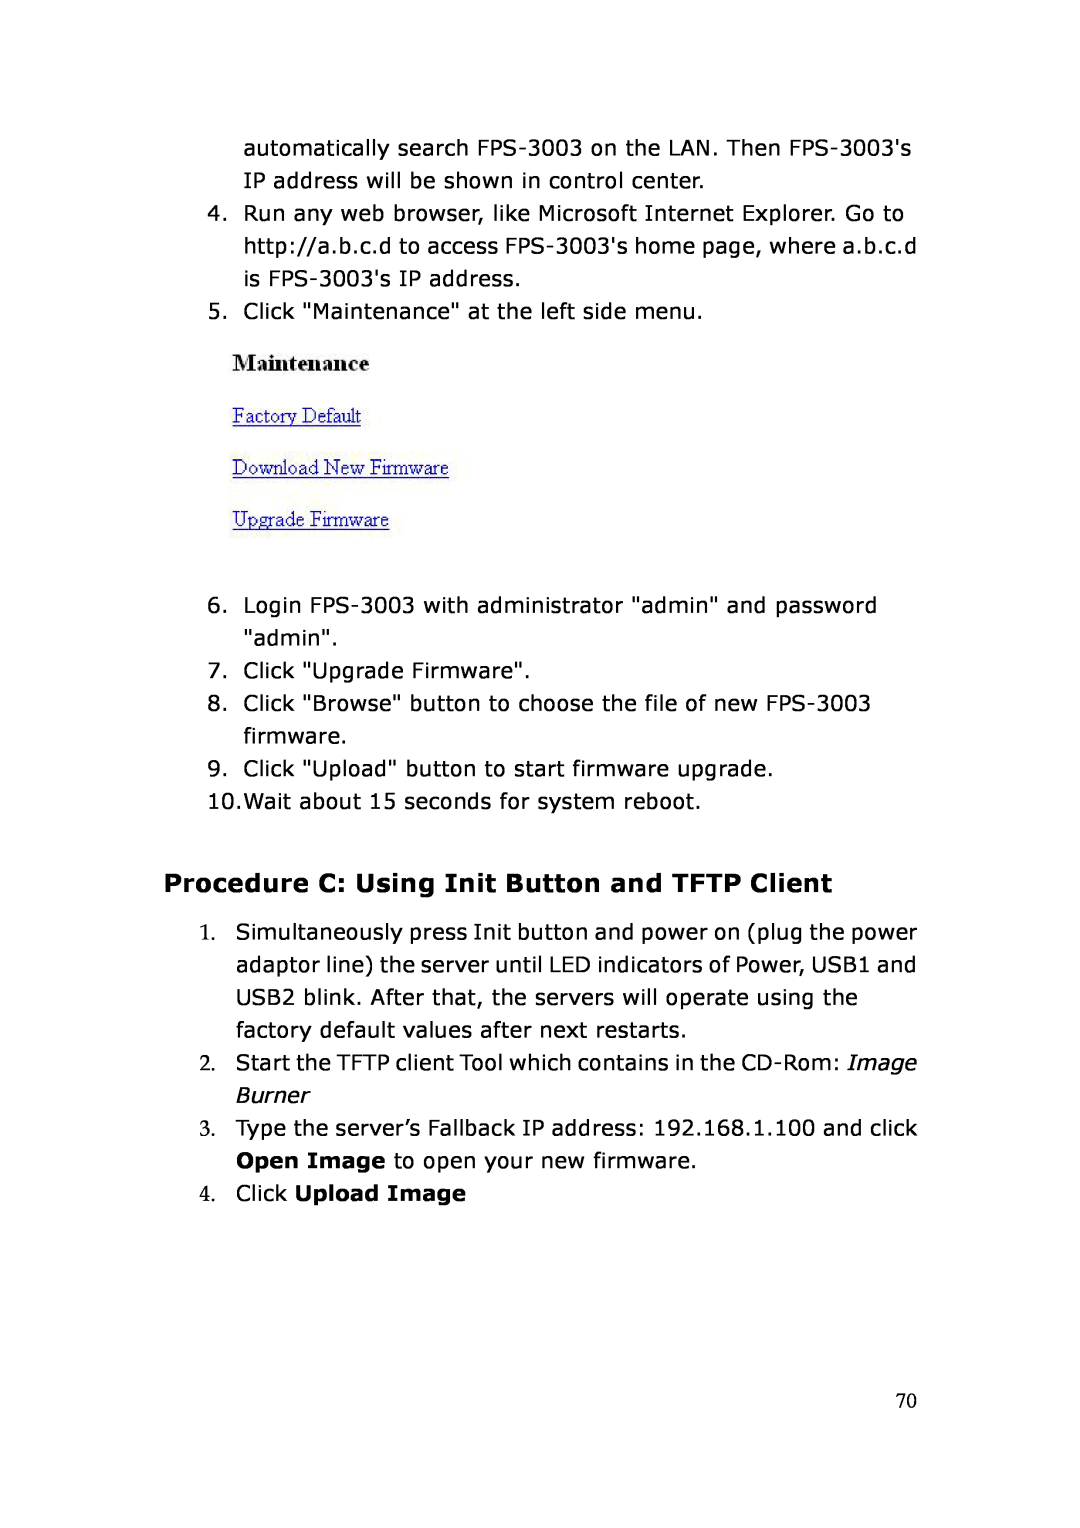 LevelOne FPS-3003 user manual Procedure C Using Init Button and TFTP Client, Click Upload Image 